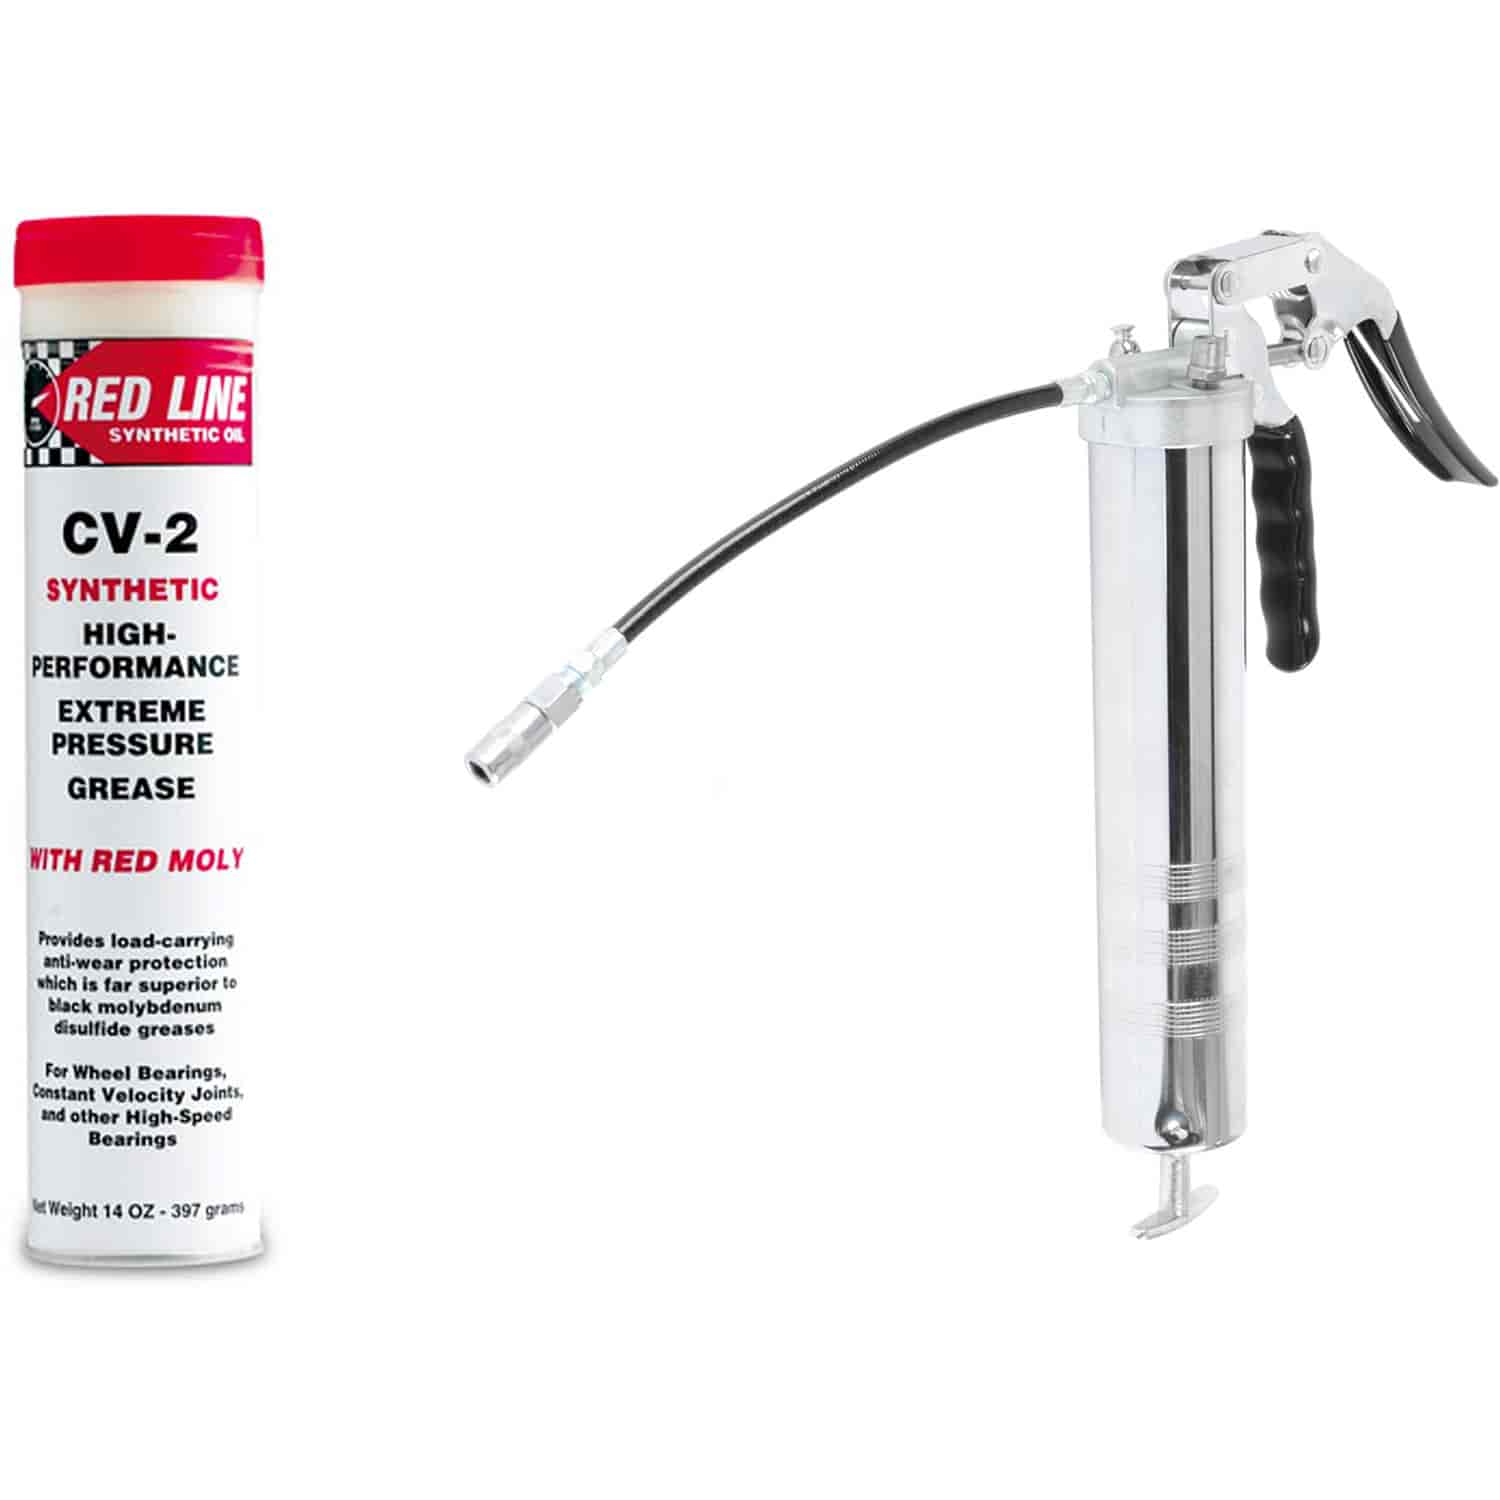 Red Line Oil CV-2 Synthetic Grease and Gun Kit